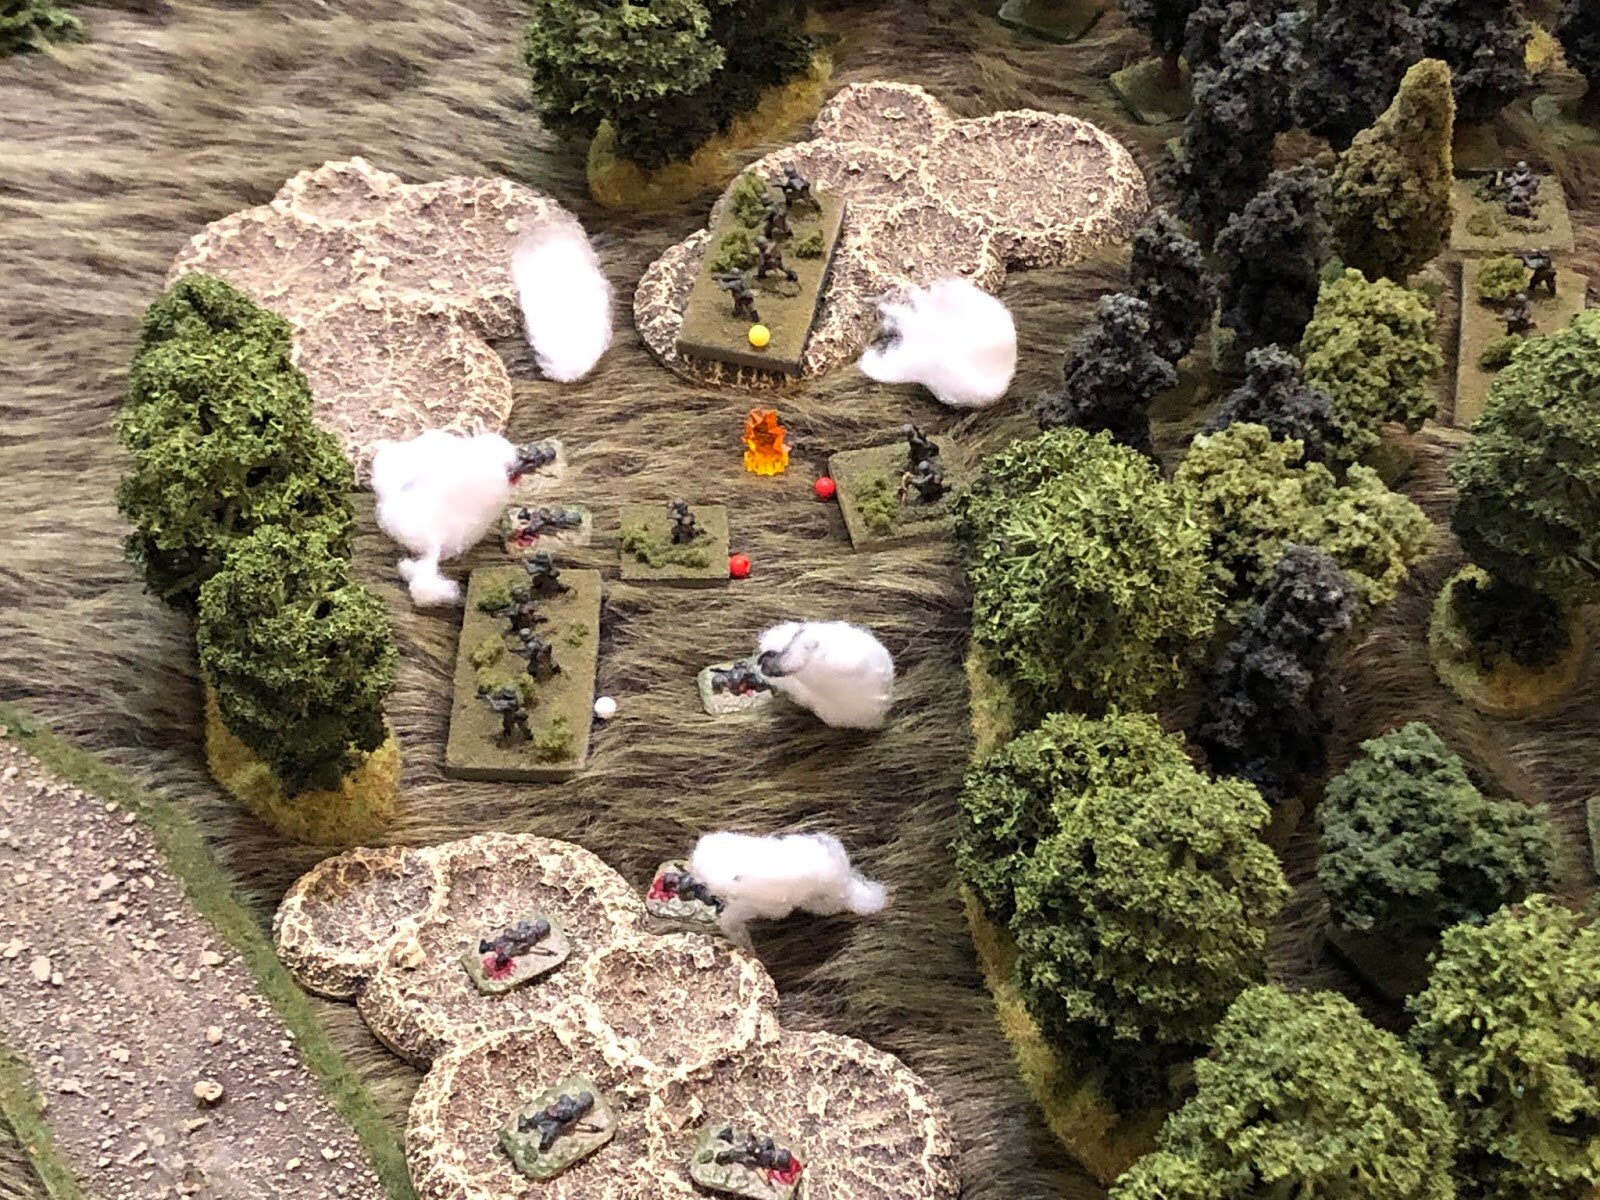  But then a fresh round of Soviet artillery crashes into the woods!  